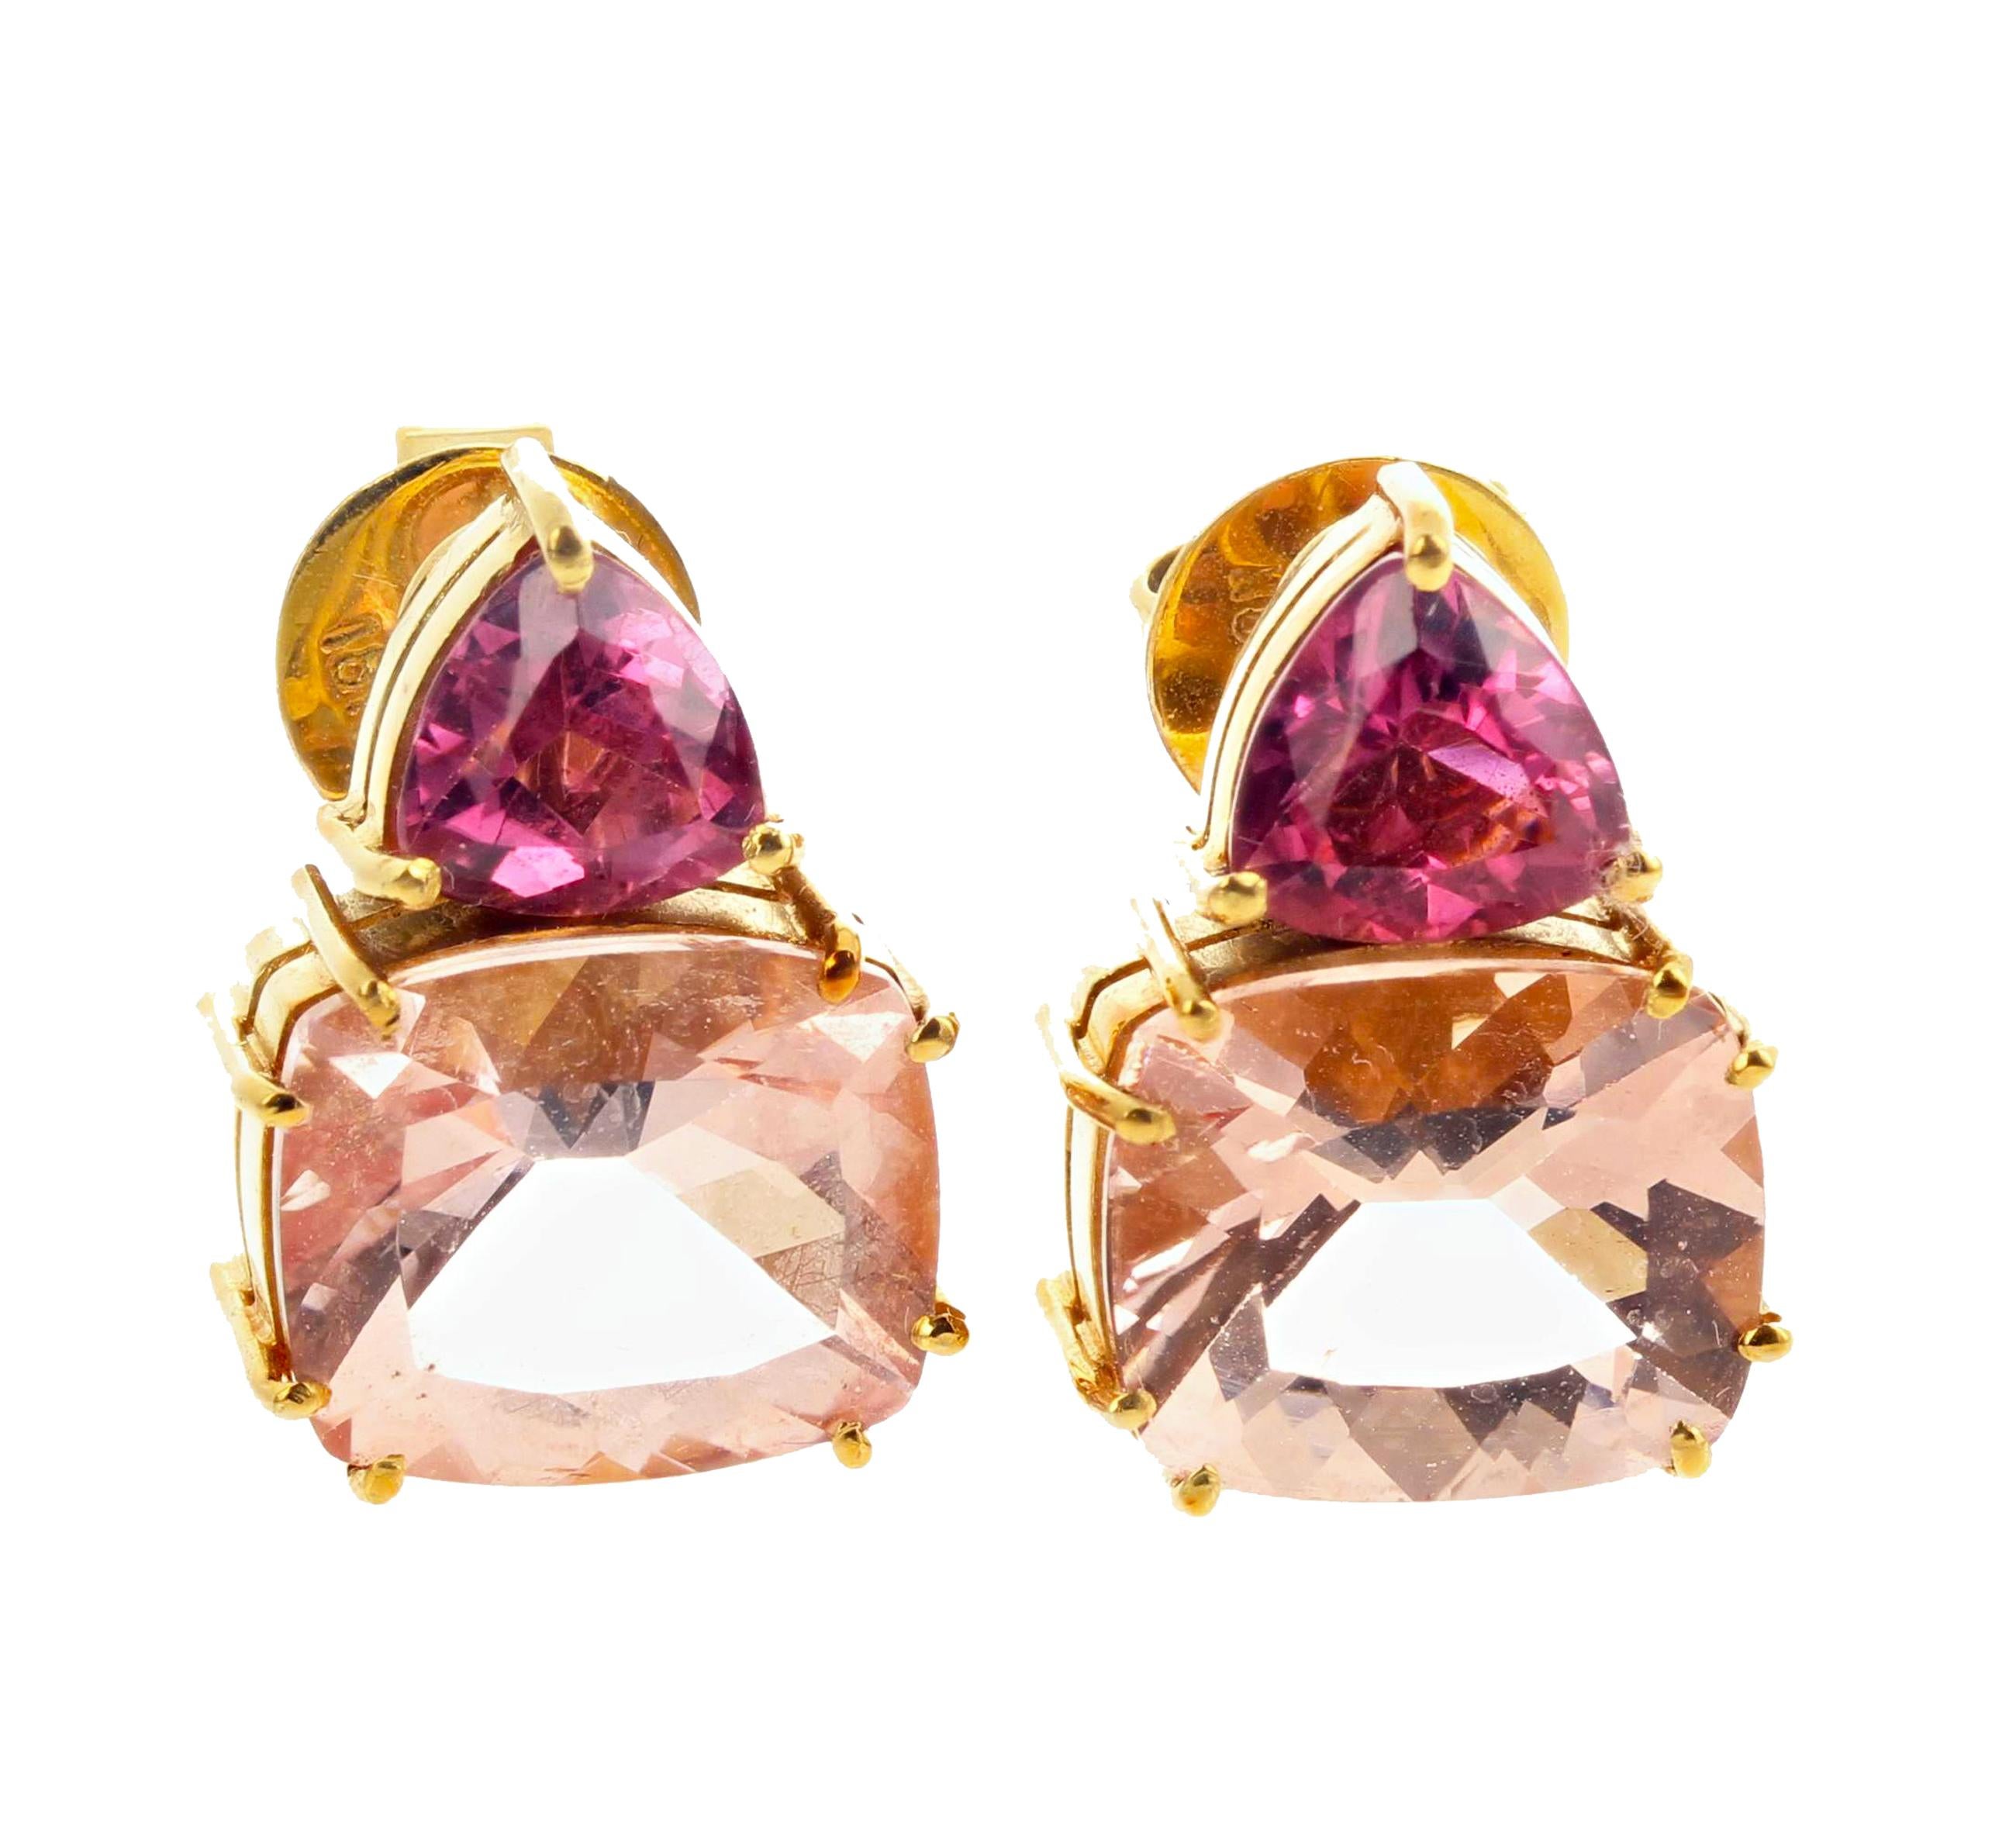 AJD SUPERB Natural Morganite & Rubelite Tourmaline 18Kt Gold Ring &Stud Earrings In New Condition For Sale In Raleigh, NC